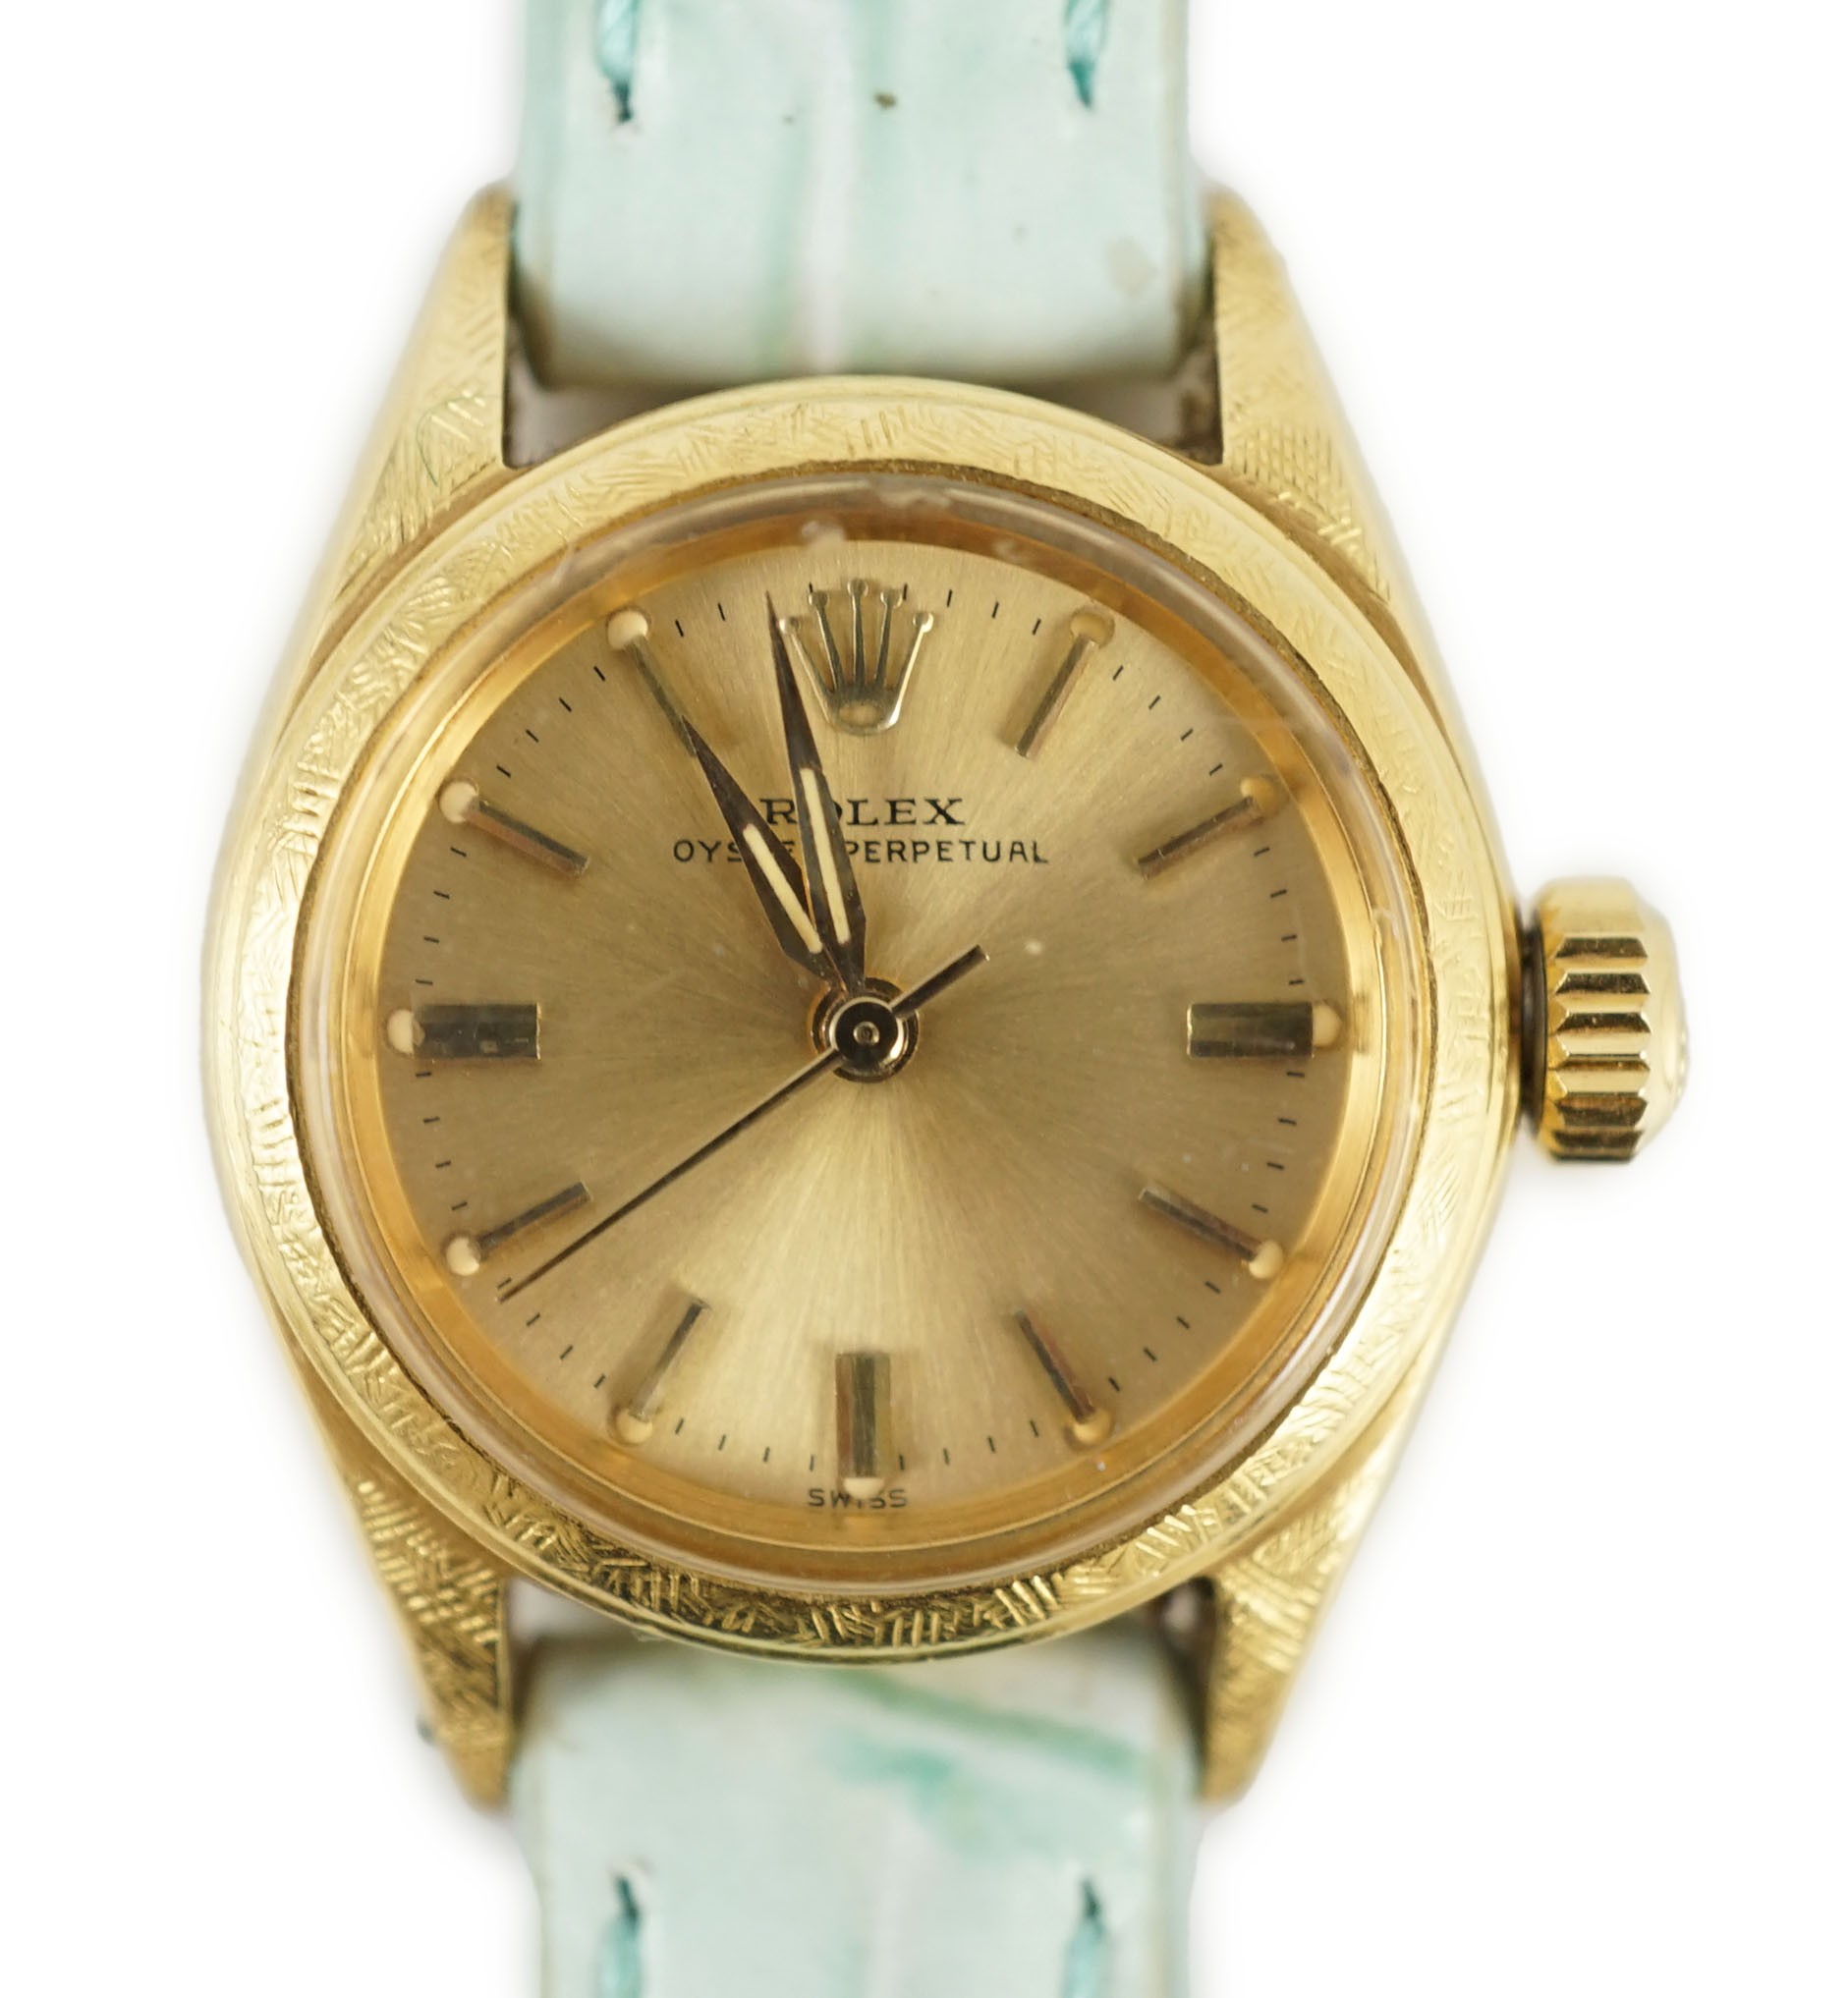 A lady's 18ct gold Rolex Oyster Perpetual wrist watch, on associated leather strap